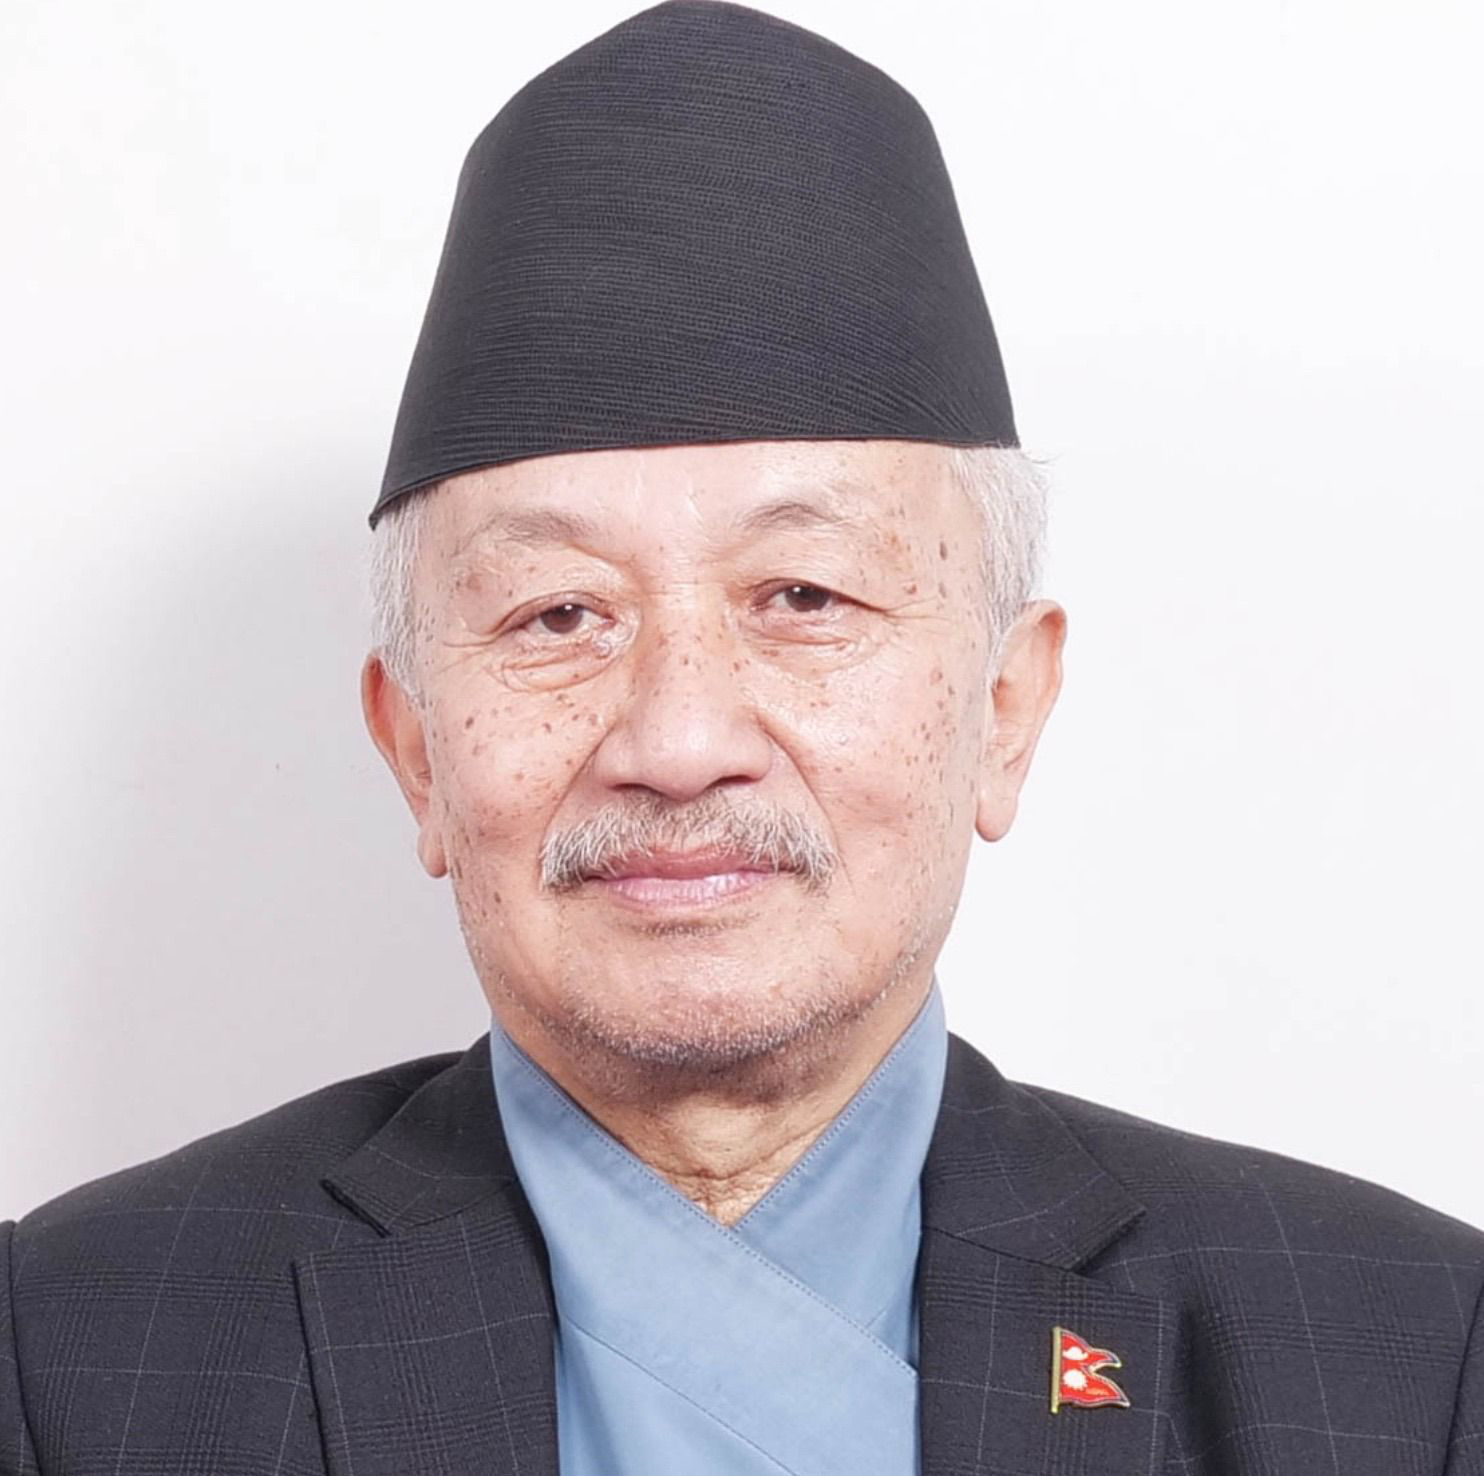 public-holiday-on-thursday-with-nepali-flag-to-fly-at-the-half-mast-mourning-the-death-of-veteran-nepali-leader-shubhash-chandra-nembang